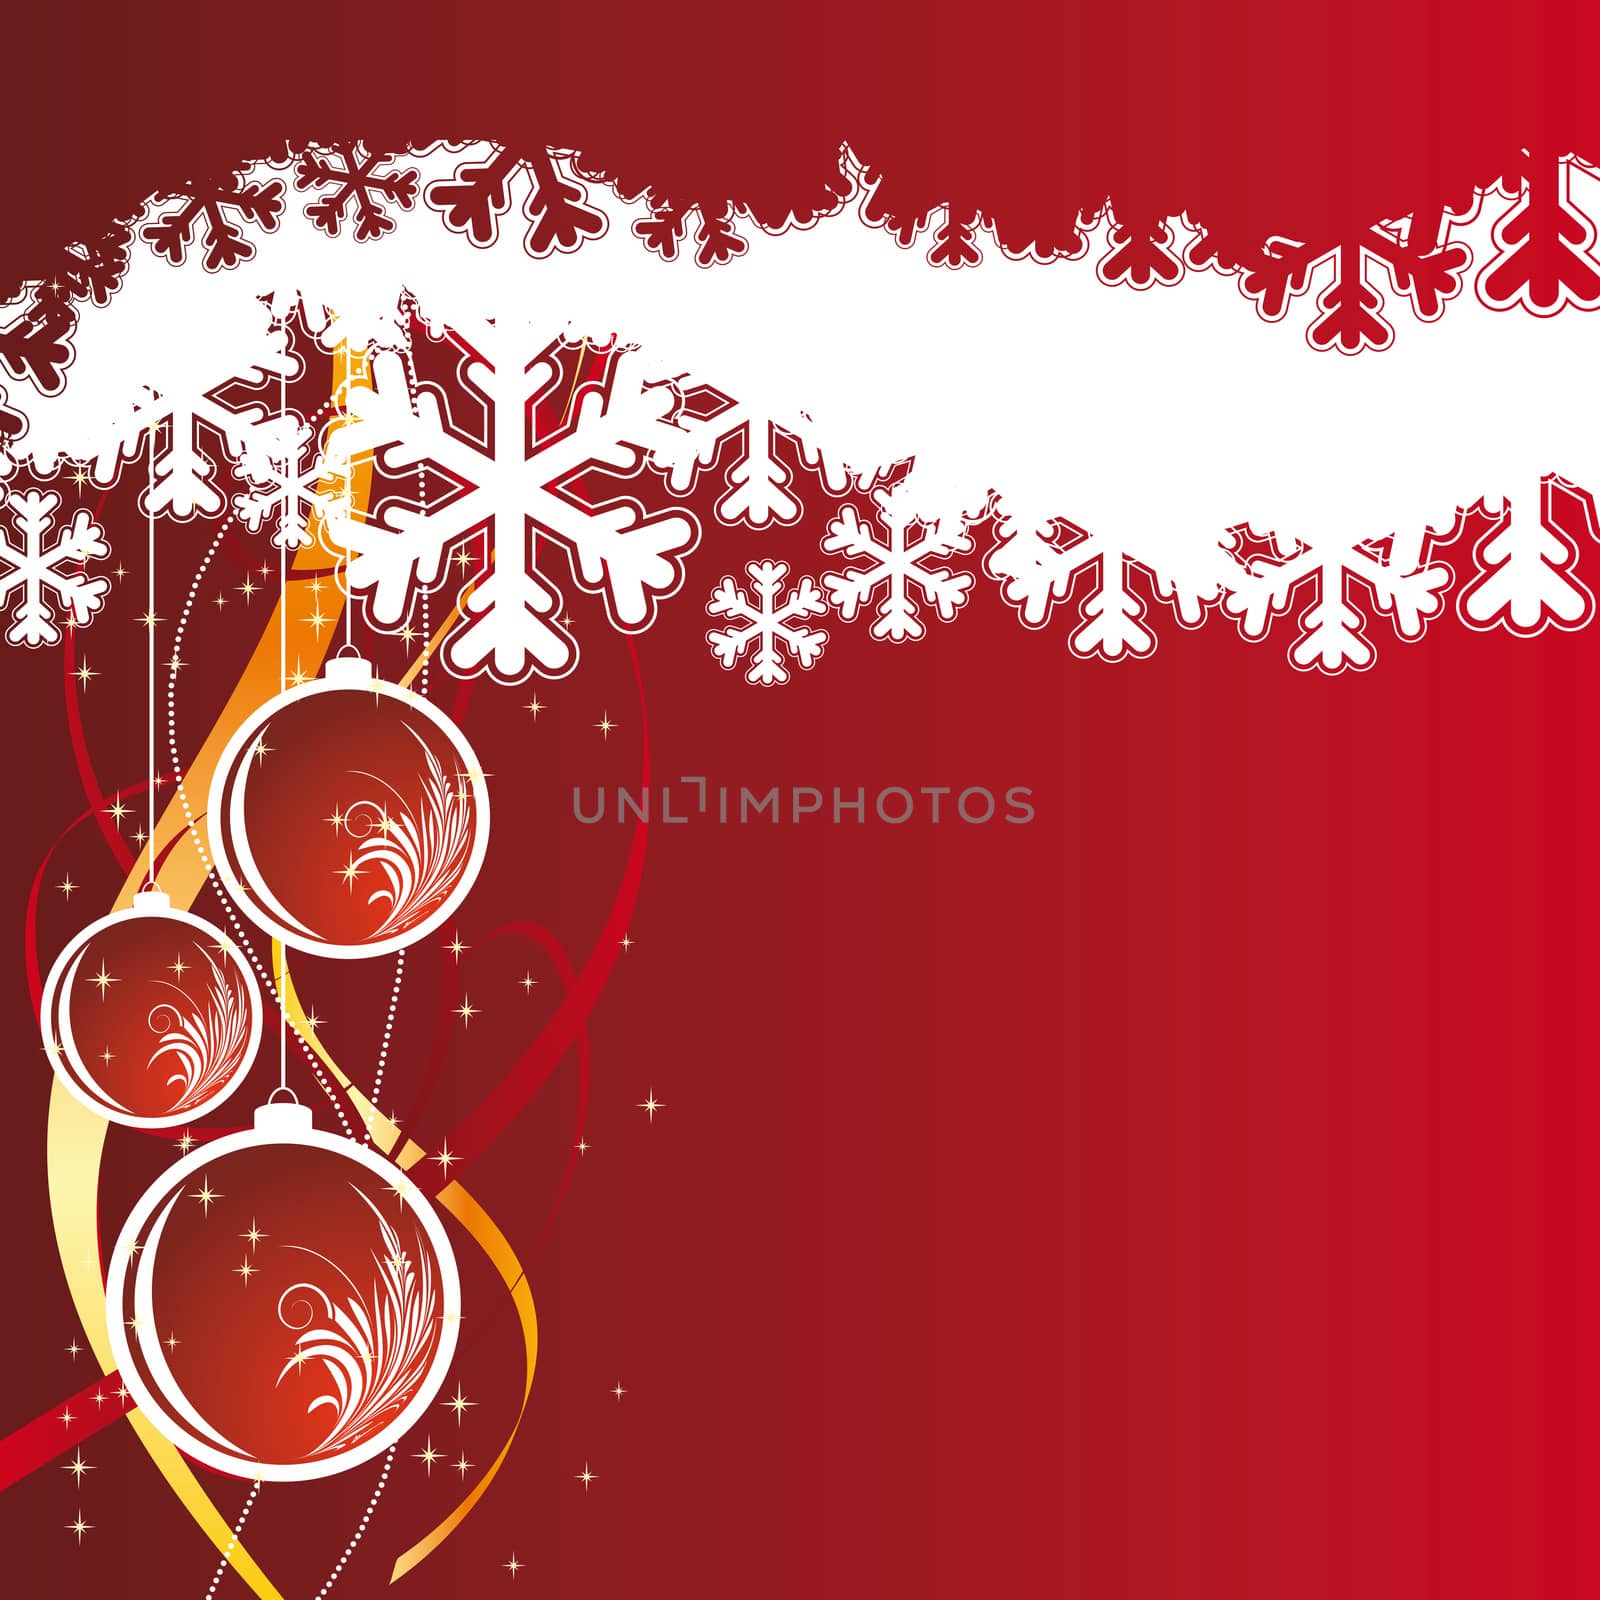 Background with snowflakes and christmas balls for your design in red color